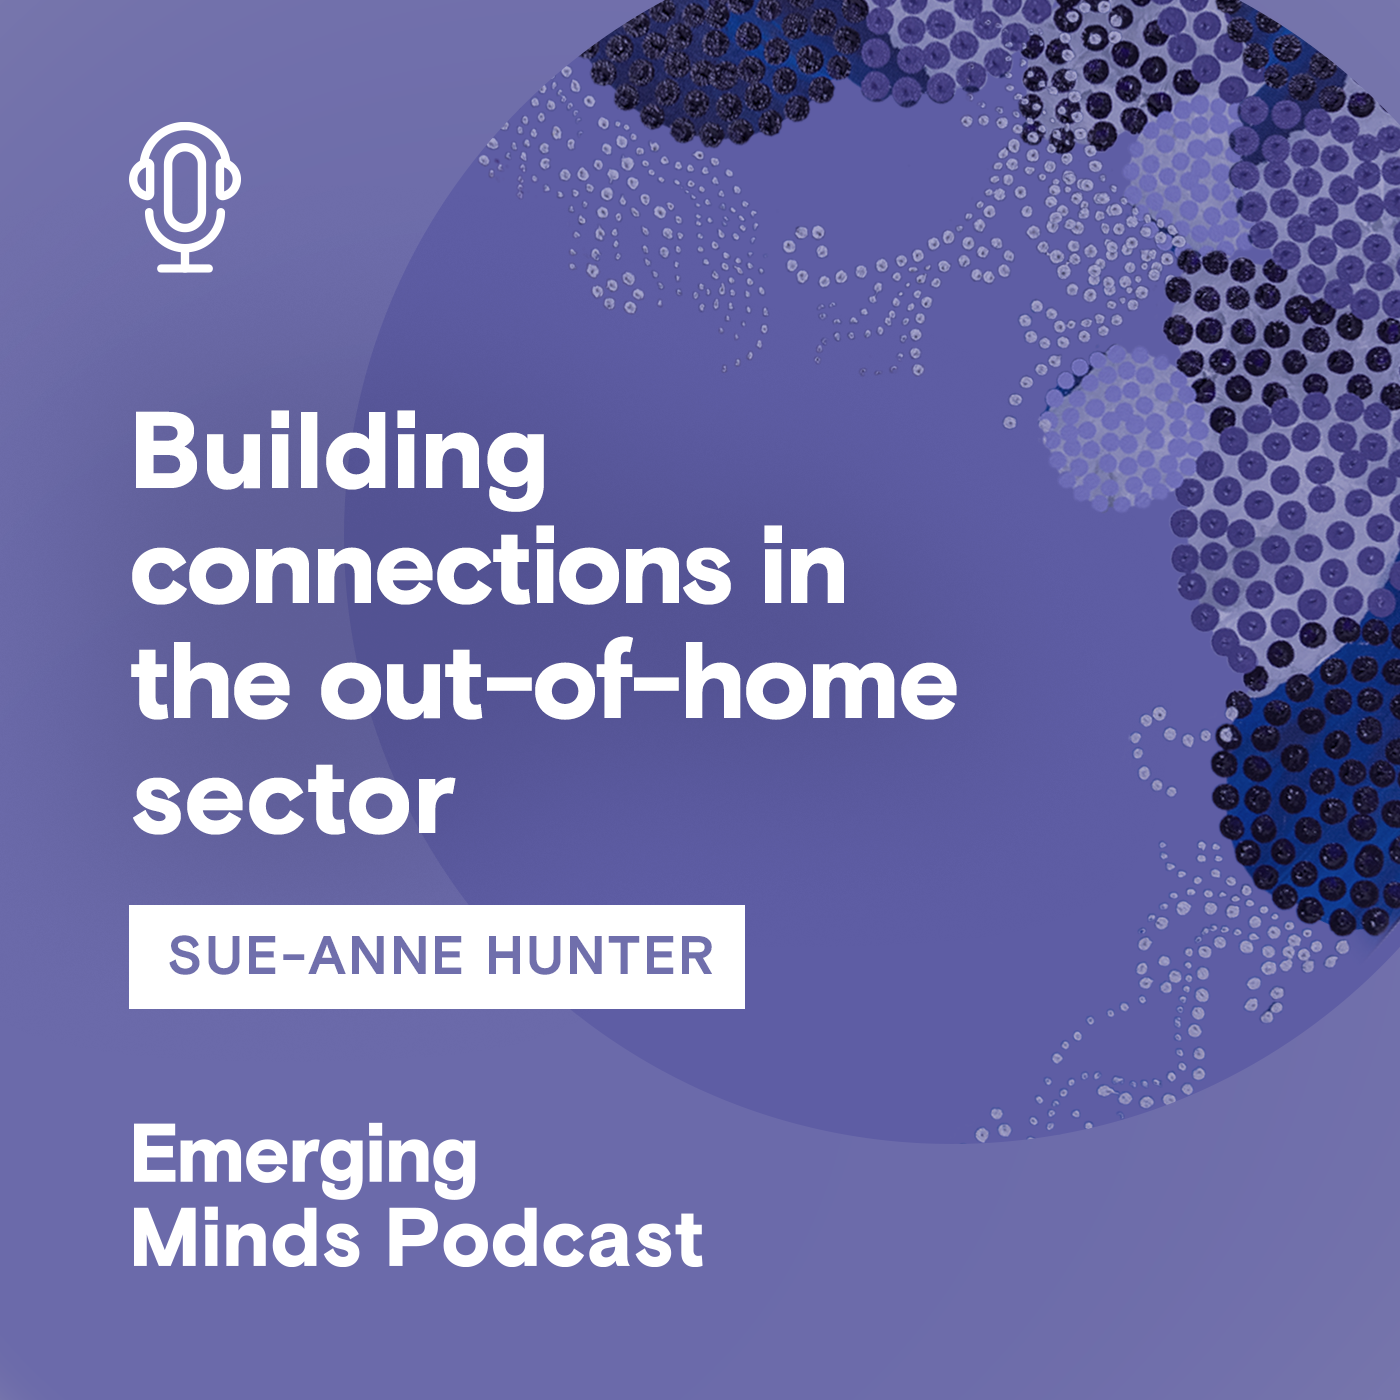 Building connections in the out-of-home sector